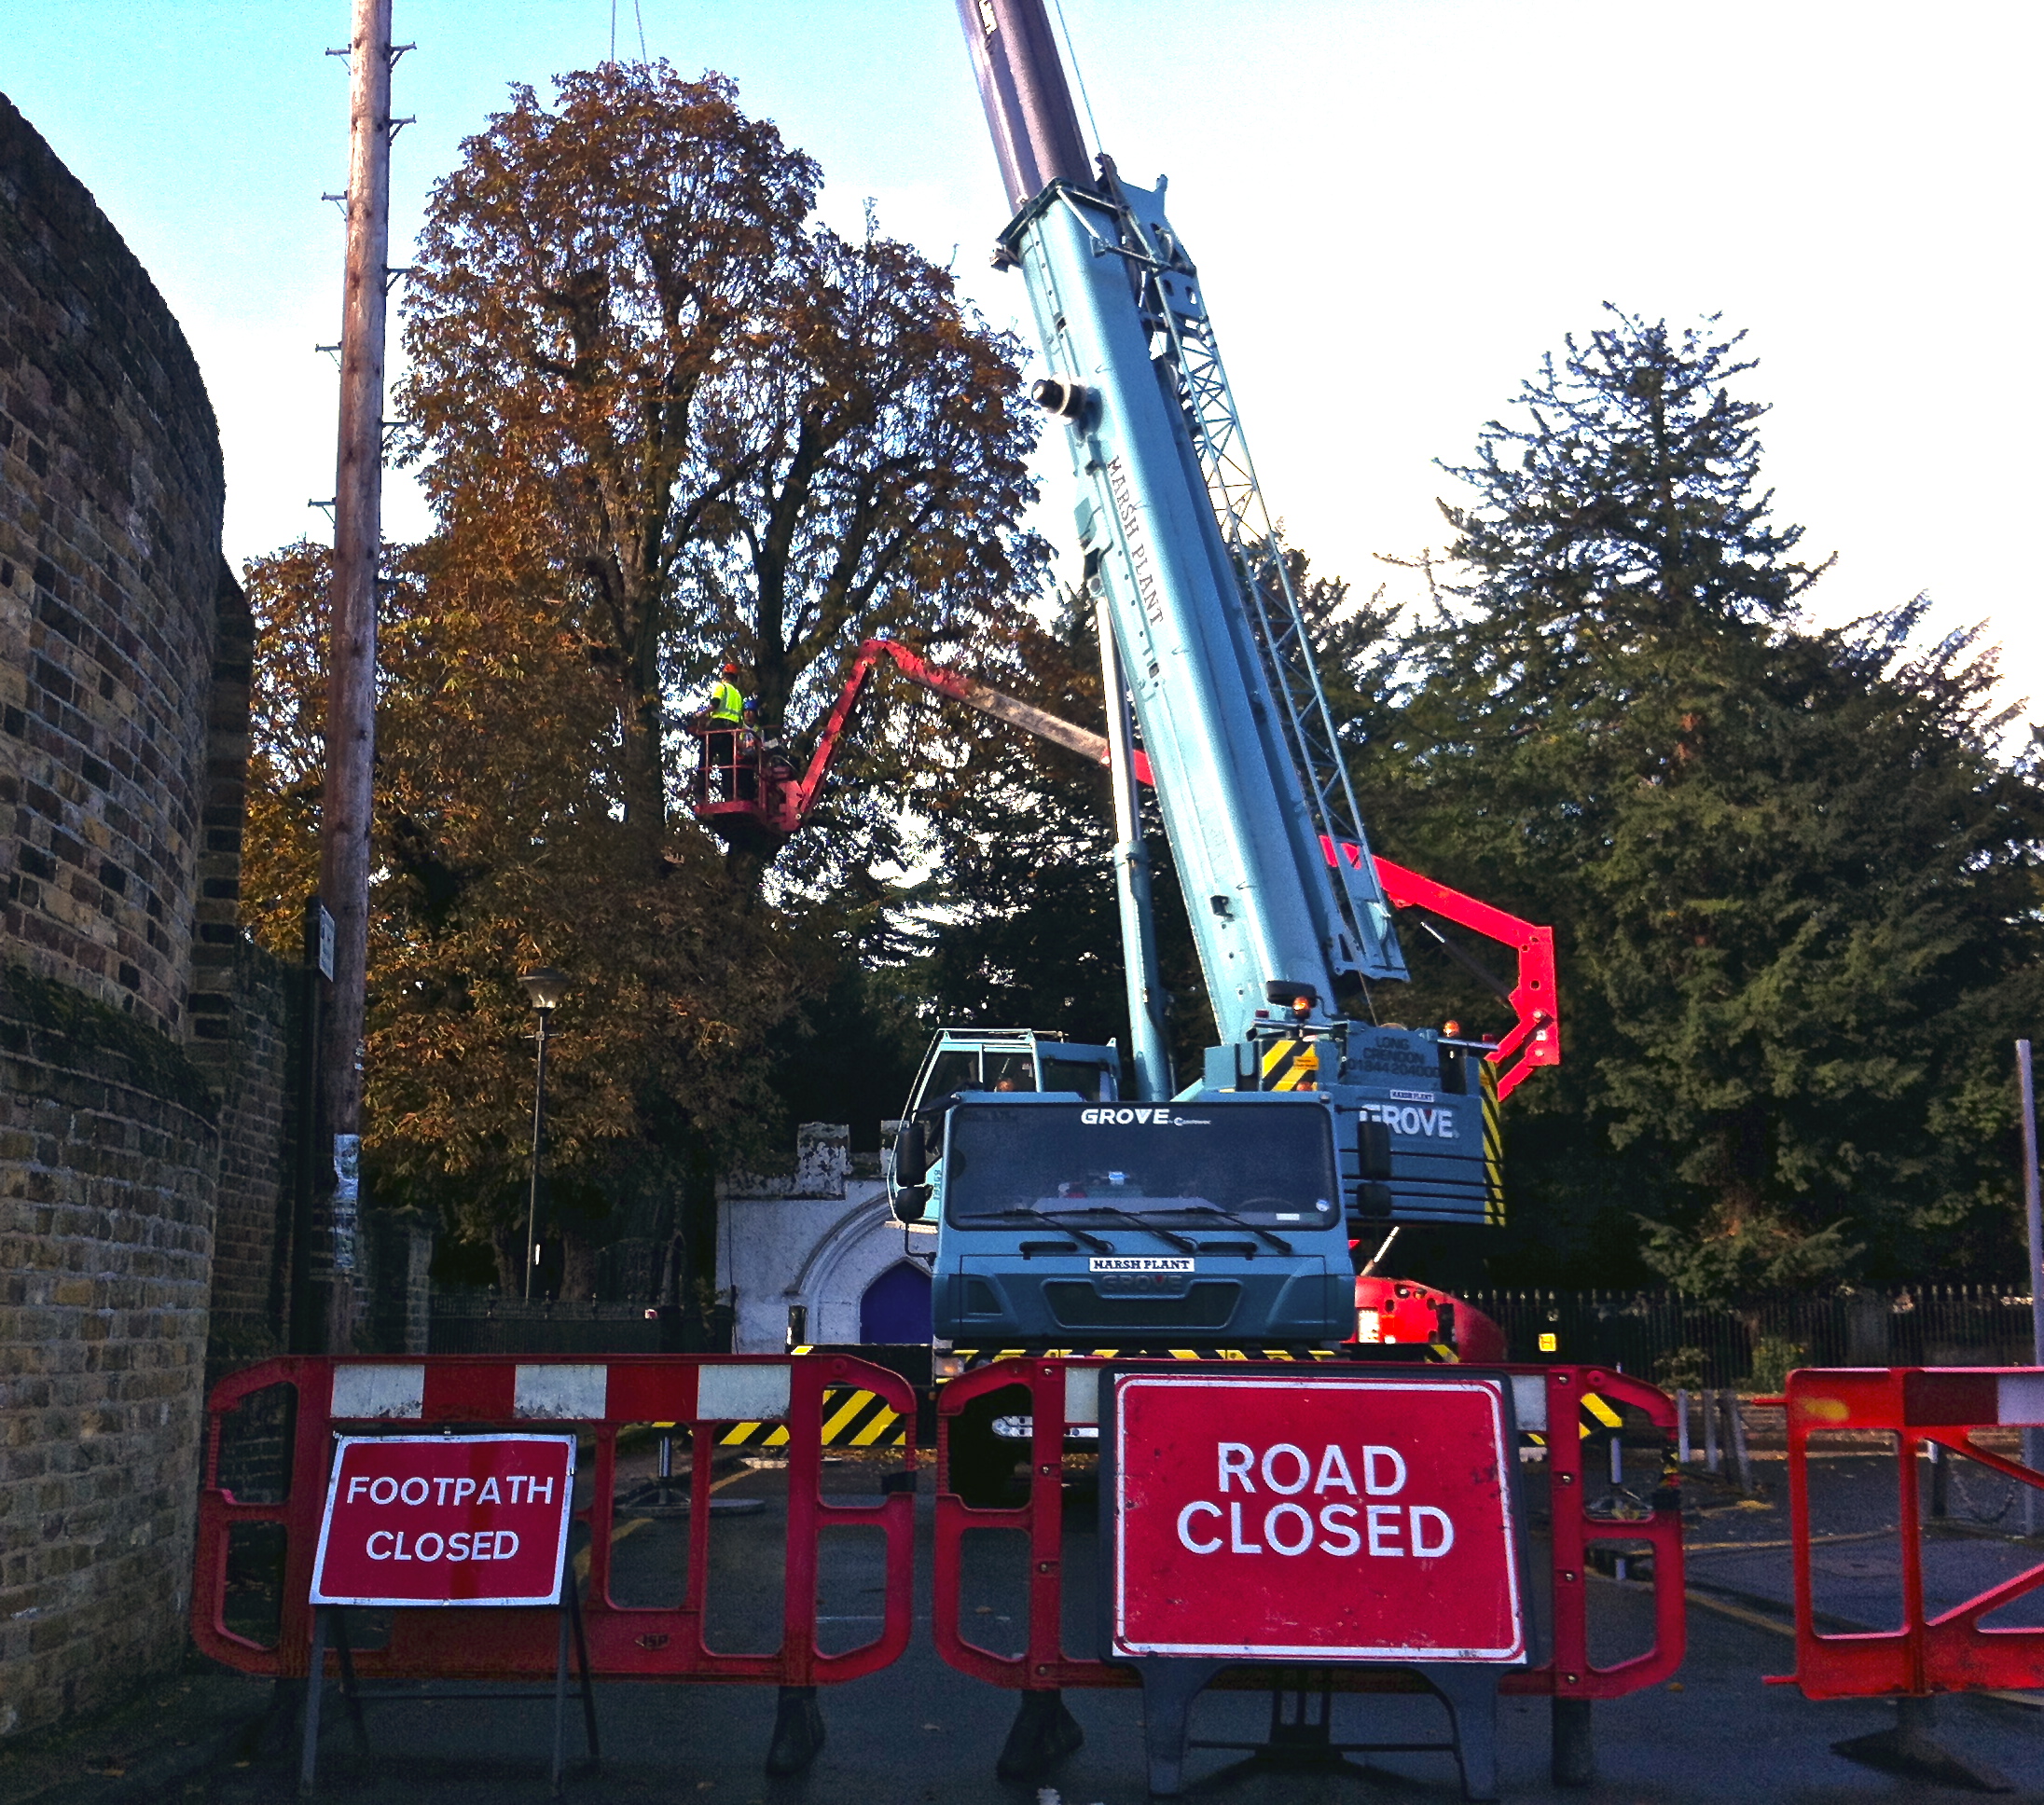 Road Closure for a Crane for Tree Surgery